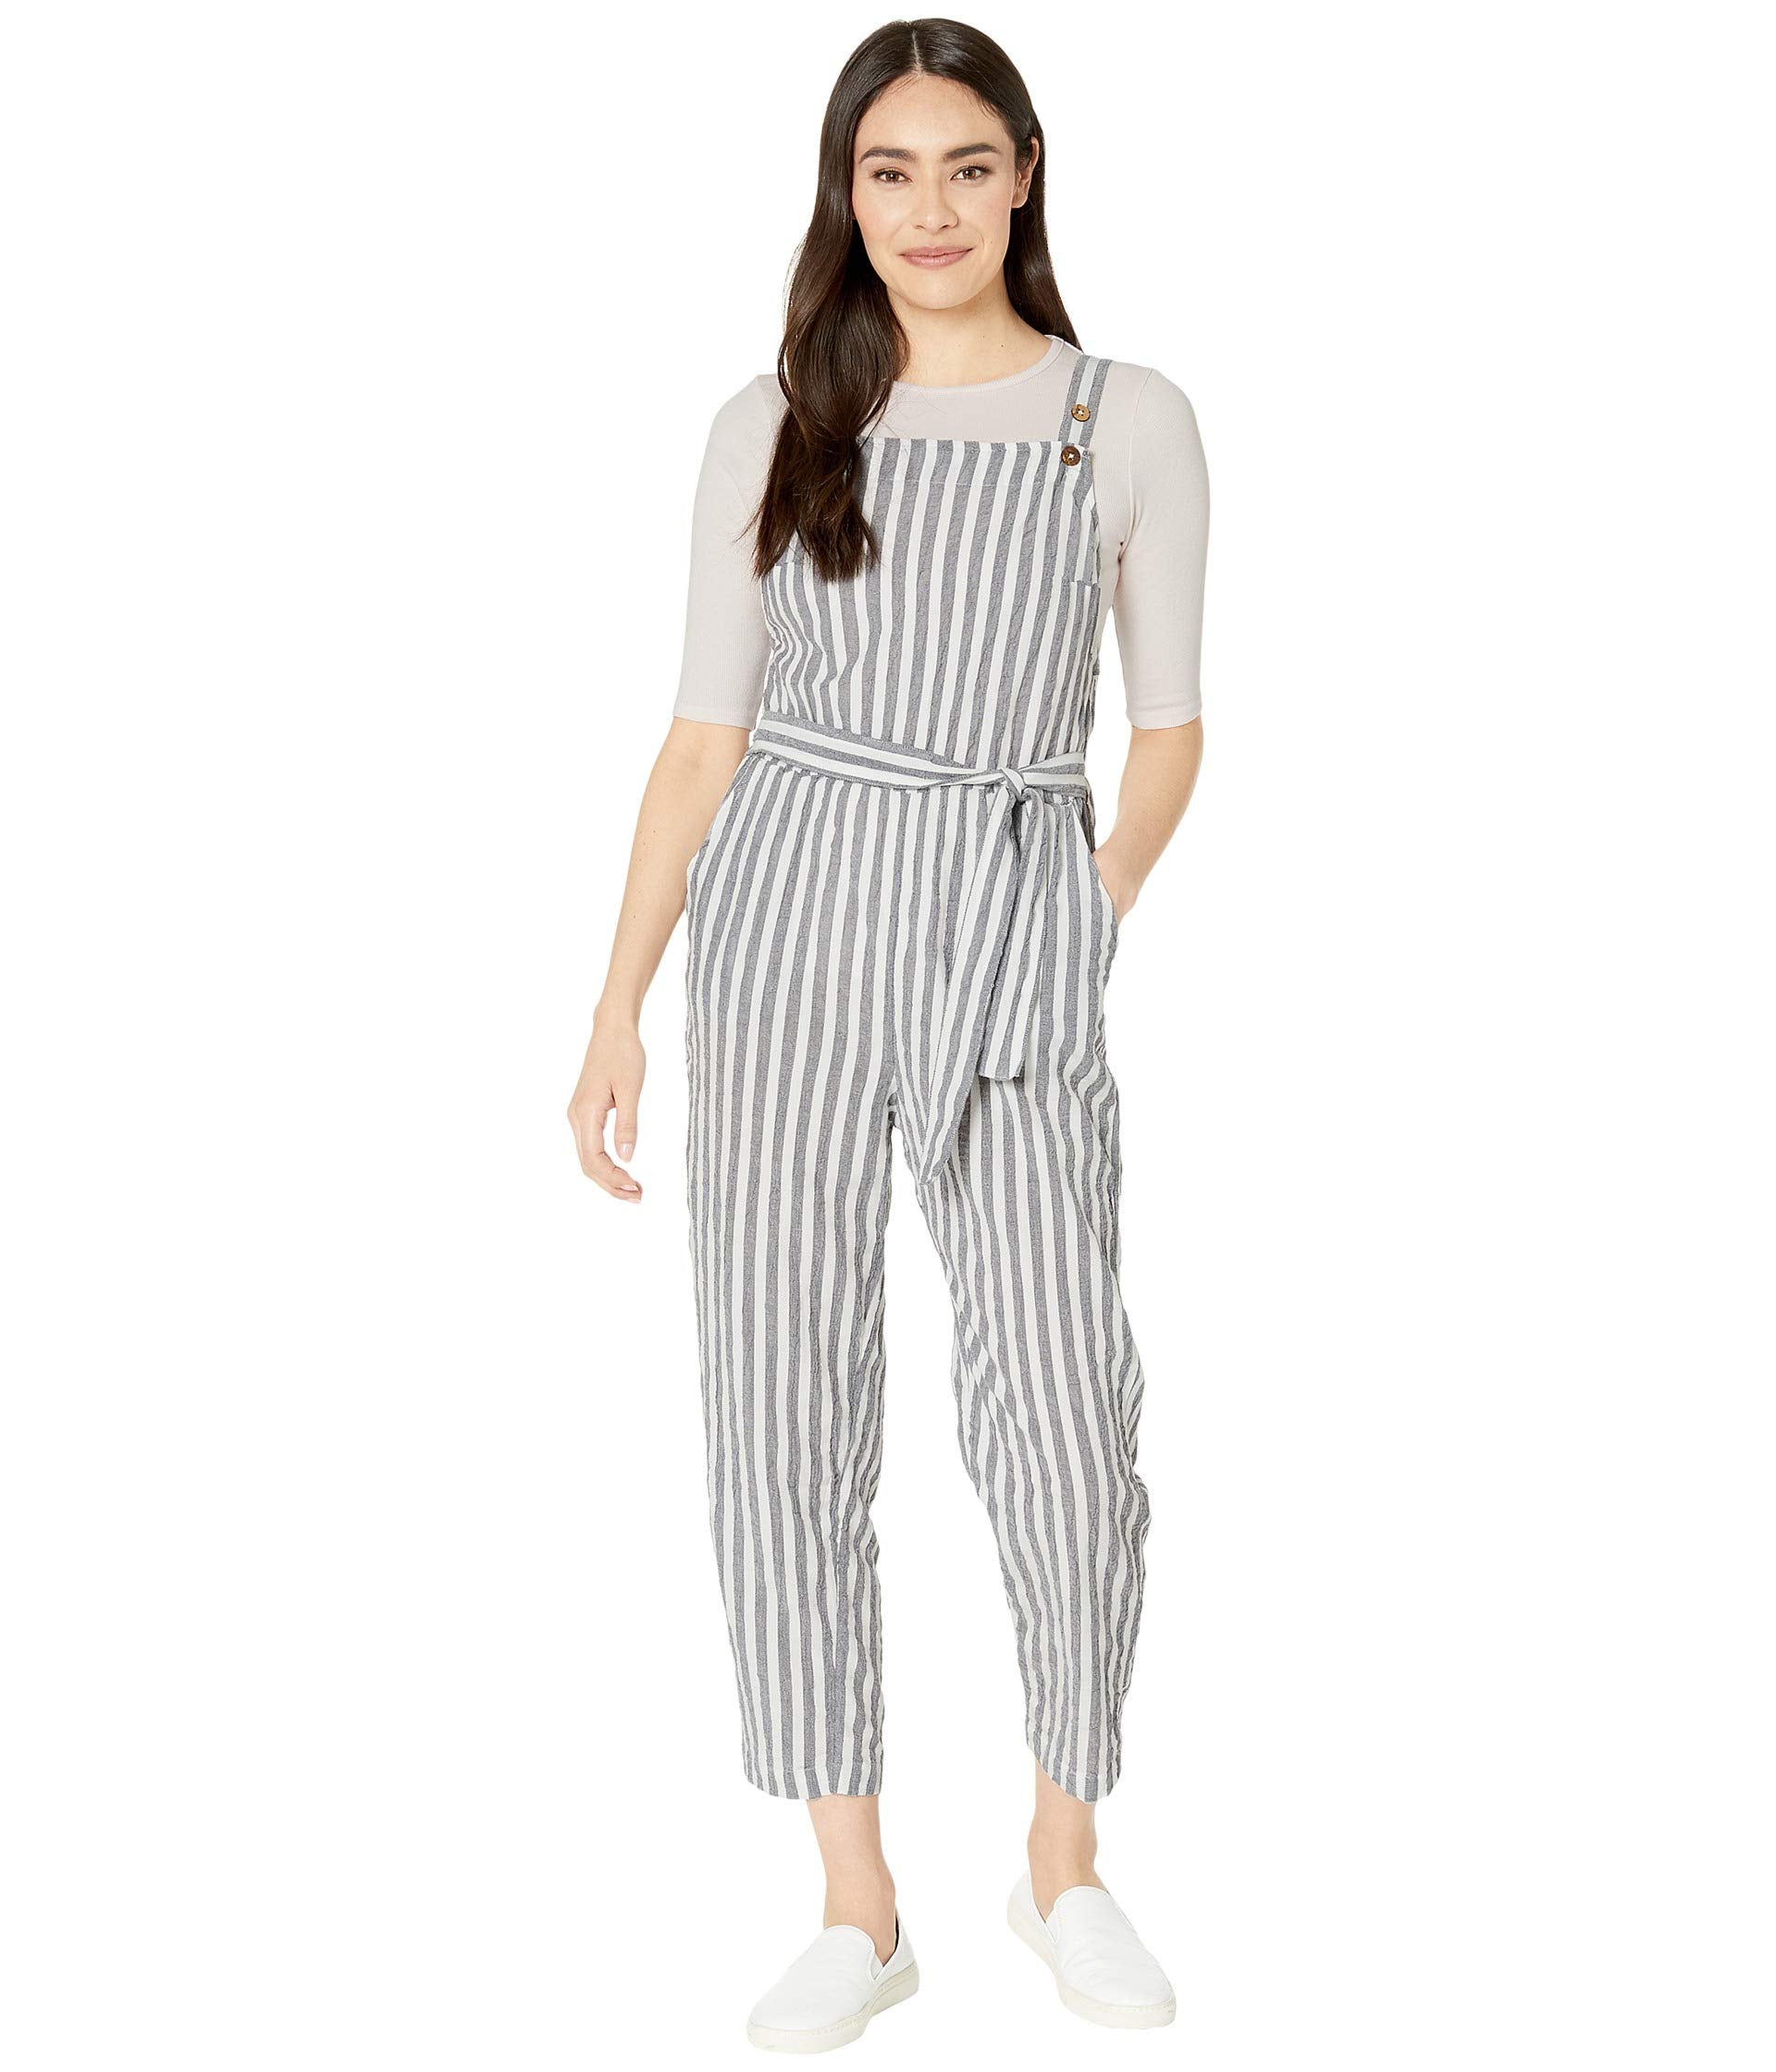 Roxy Another You Jumpsuit XWBW XS